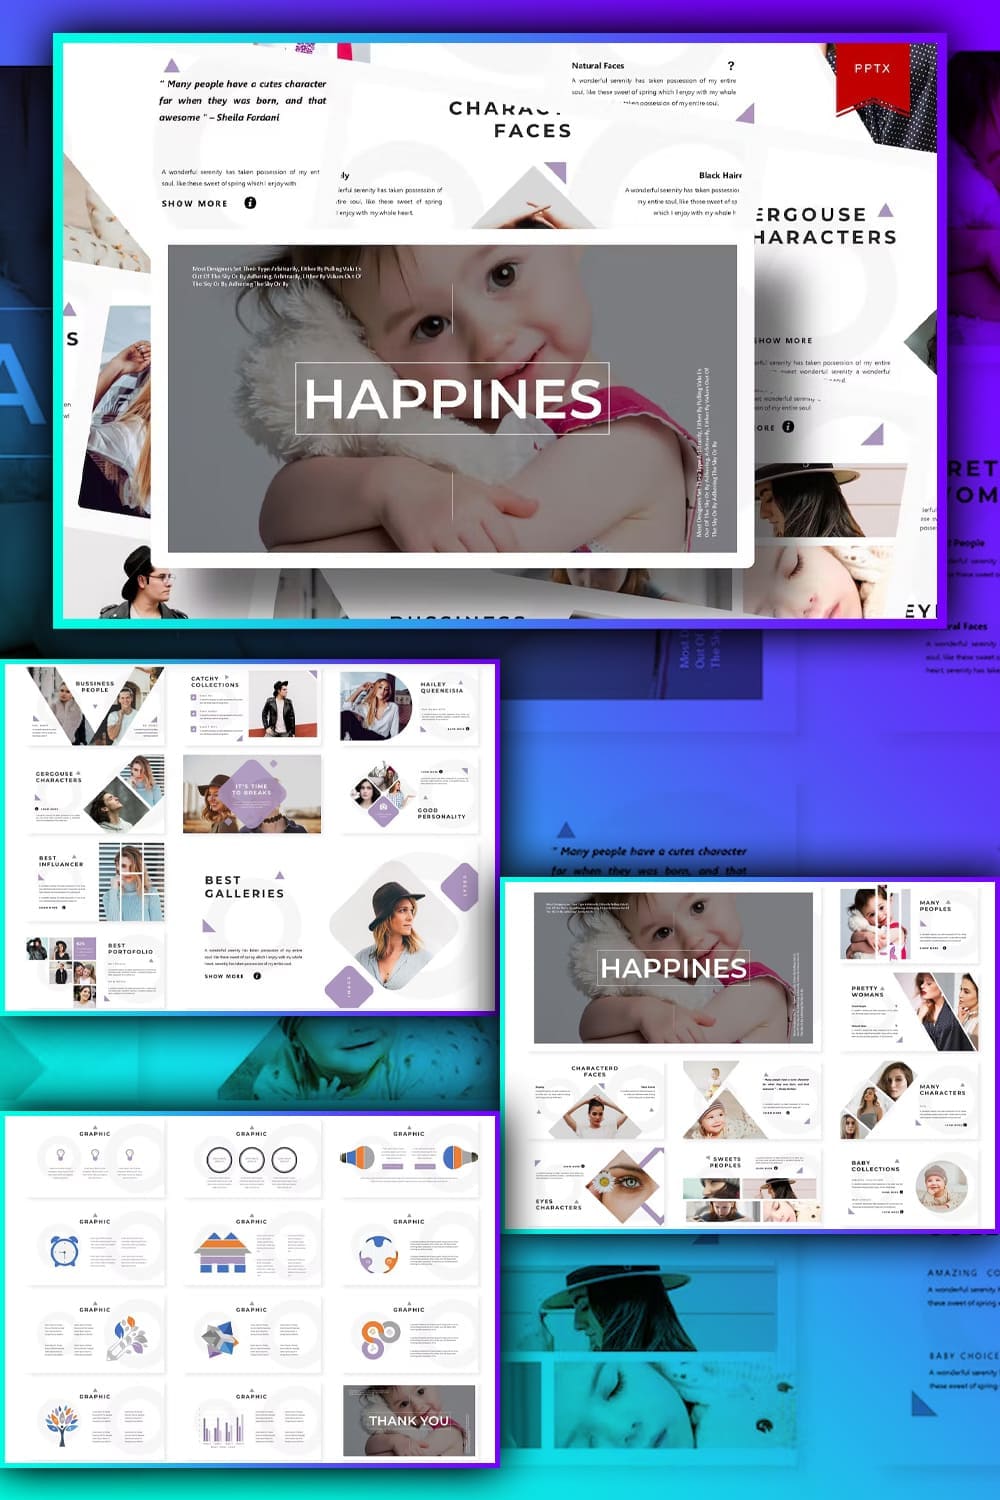 Happines powerpoint template, picture for pinterest 1000x1500.